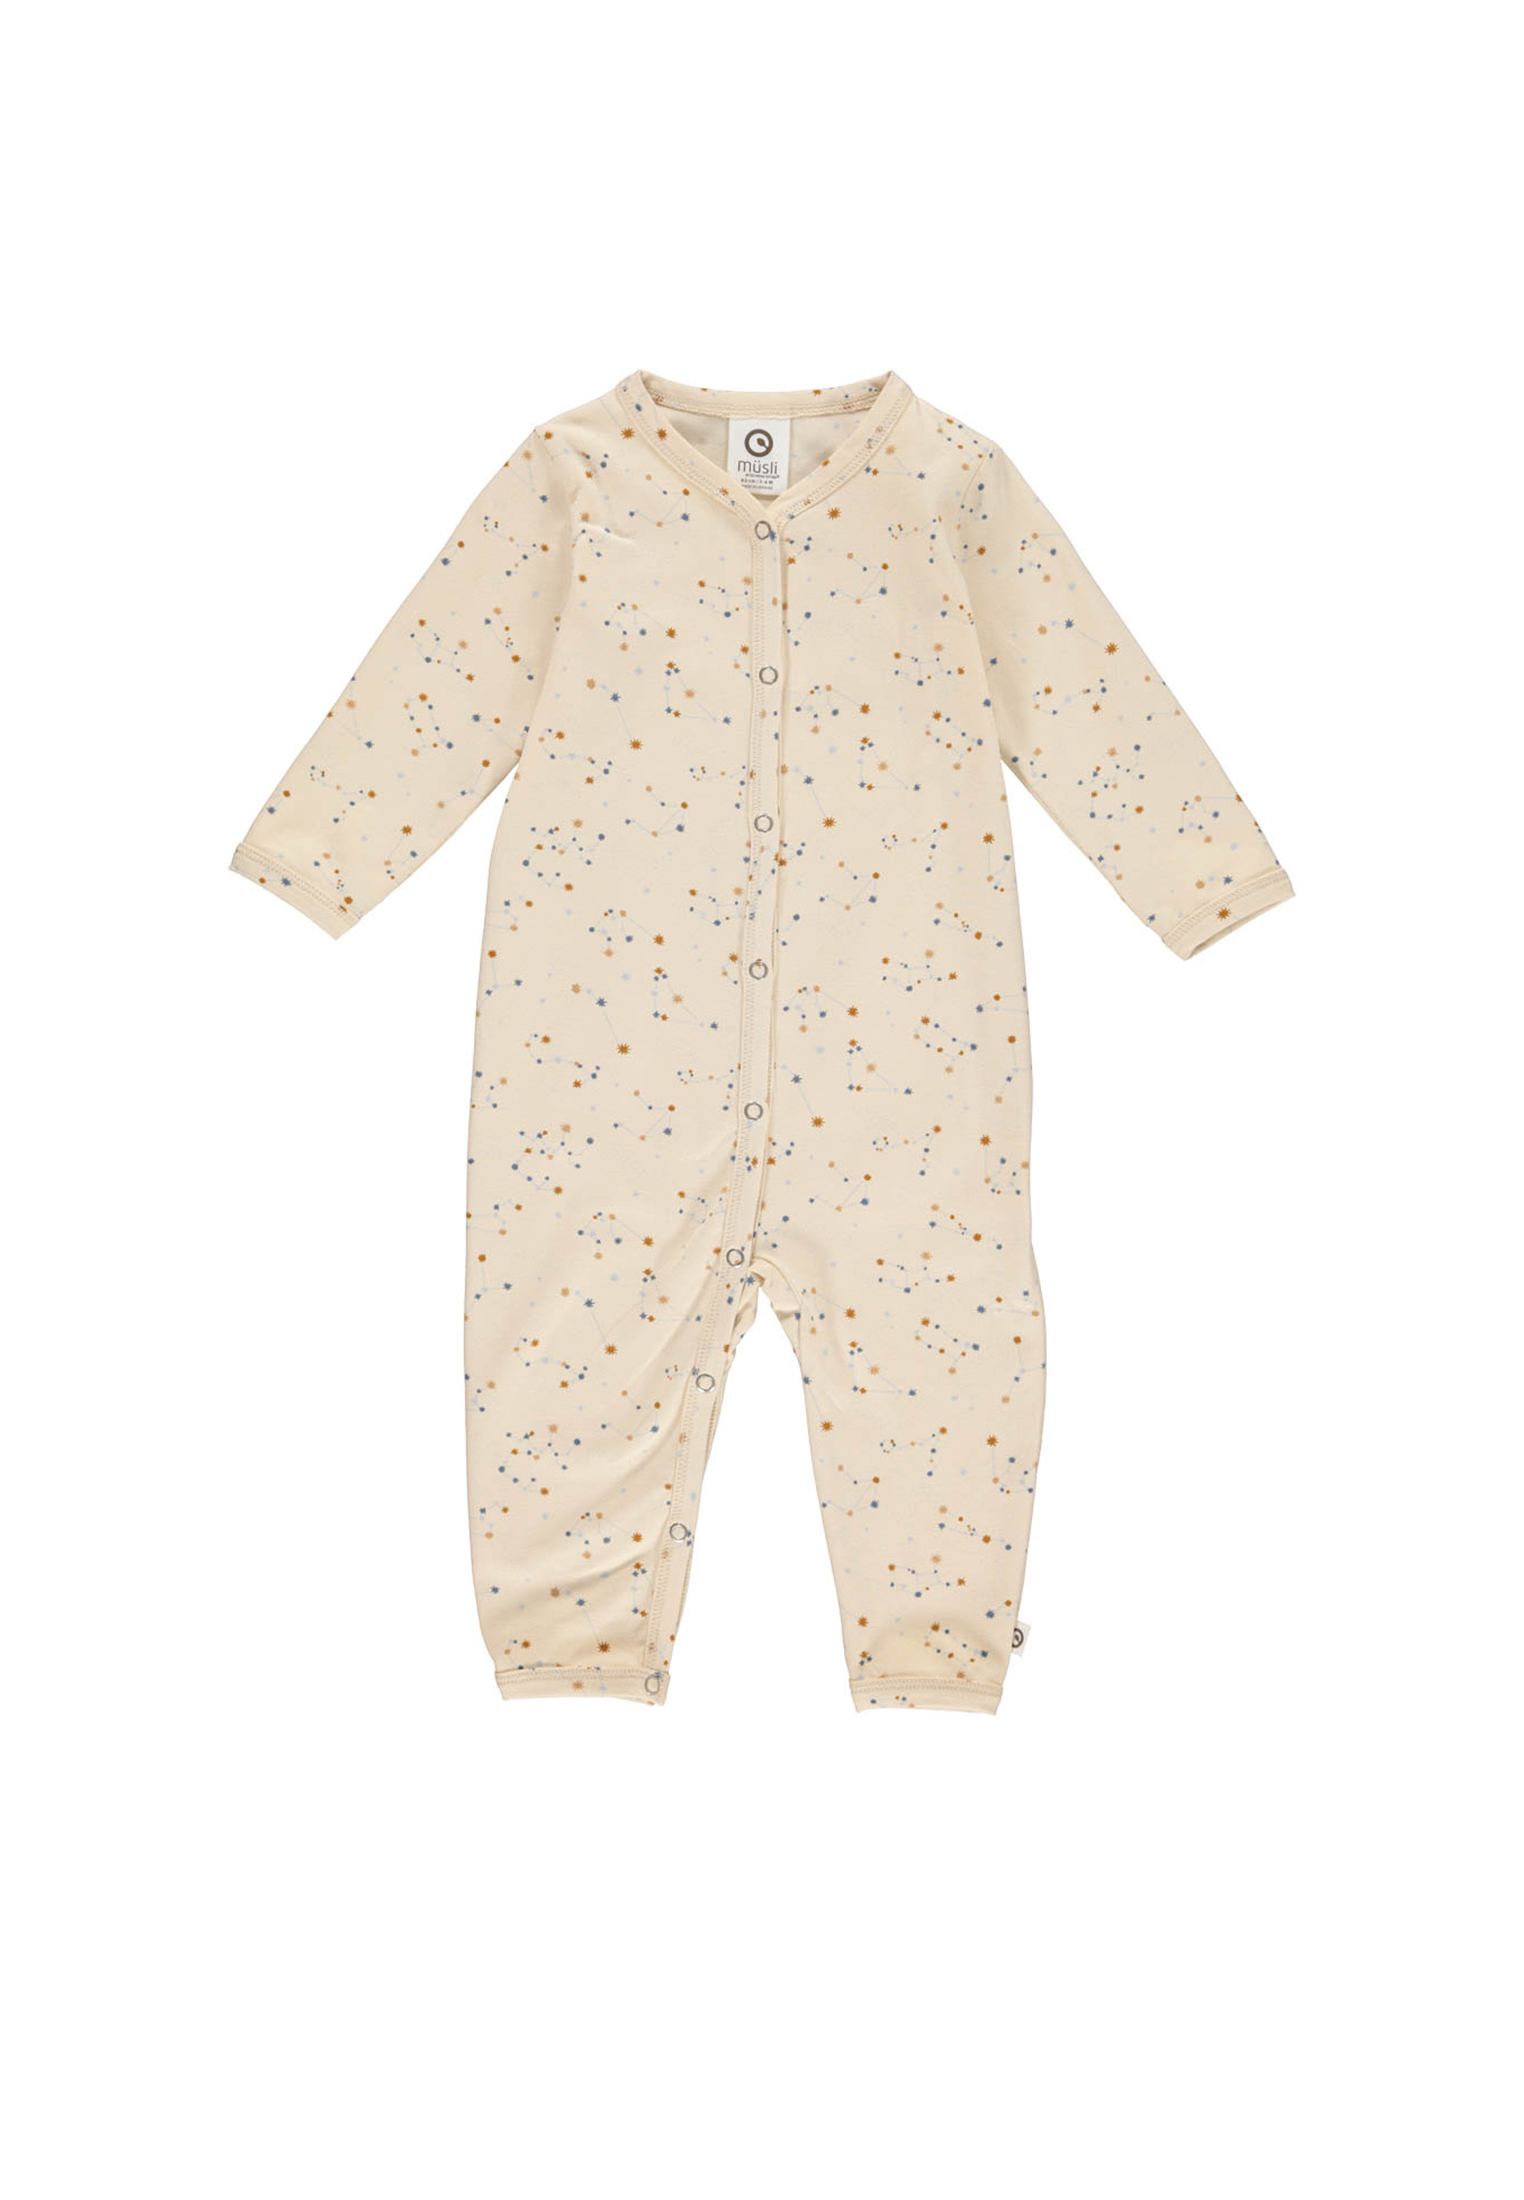 MAMA.LICIOUS Baby one-piece suit -Buttercream - 1584059200